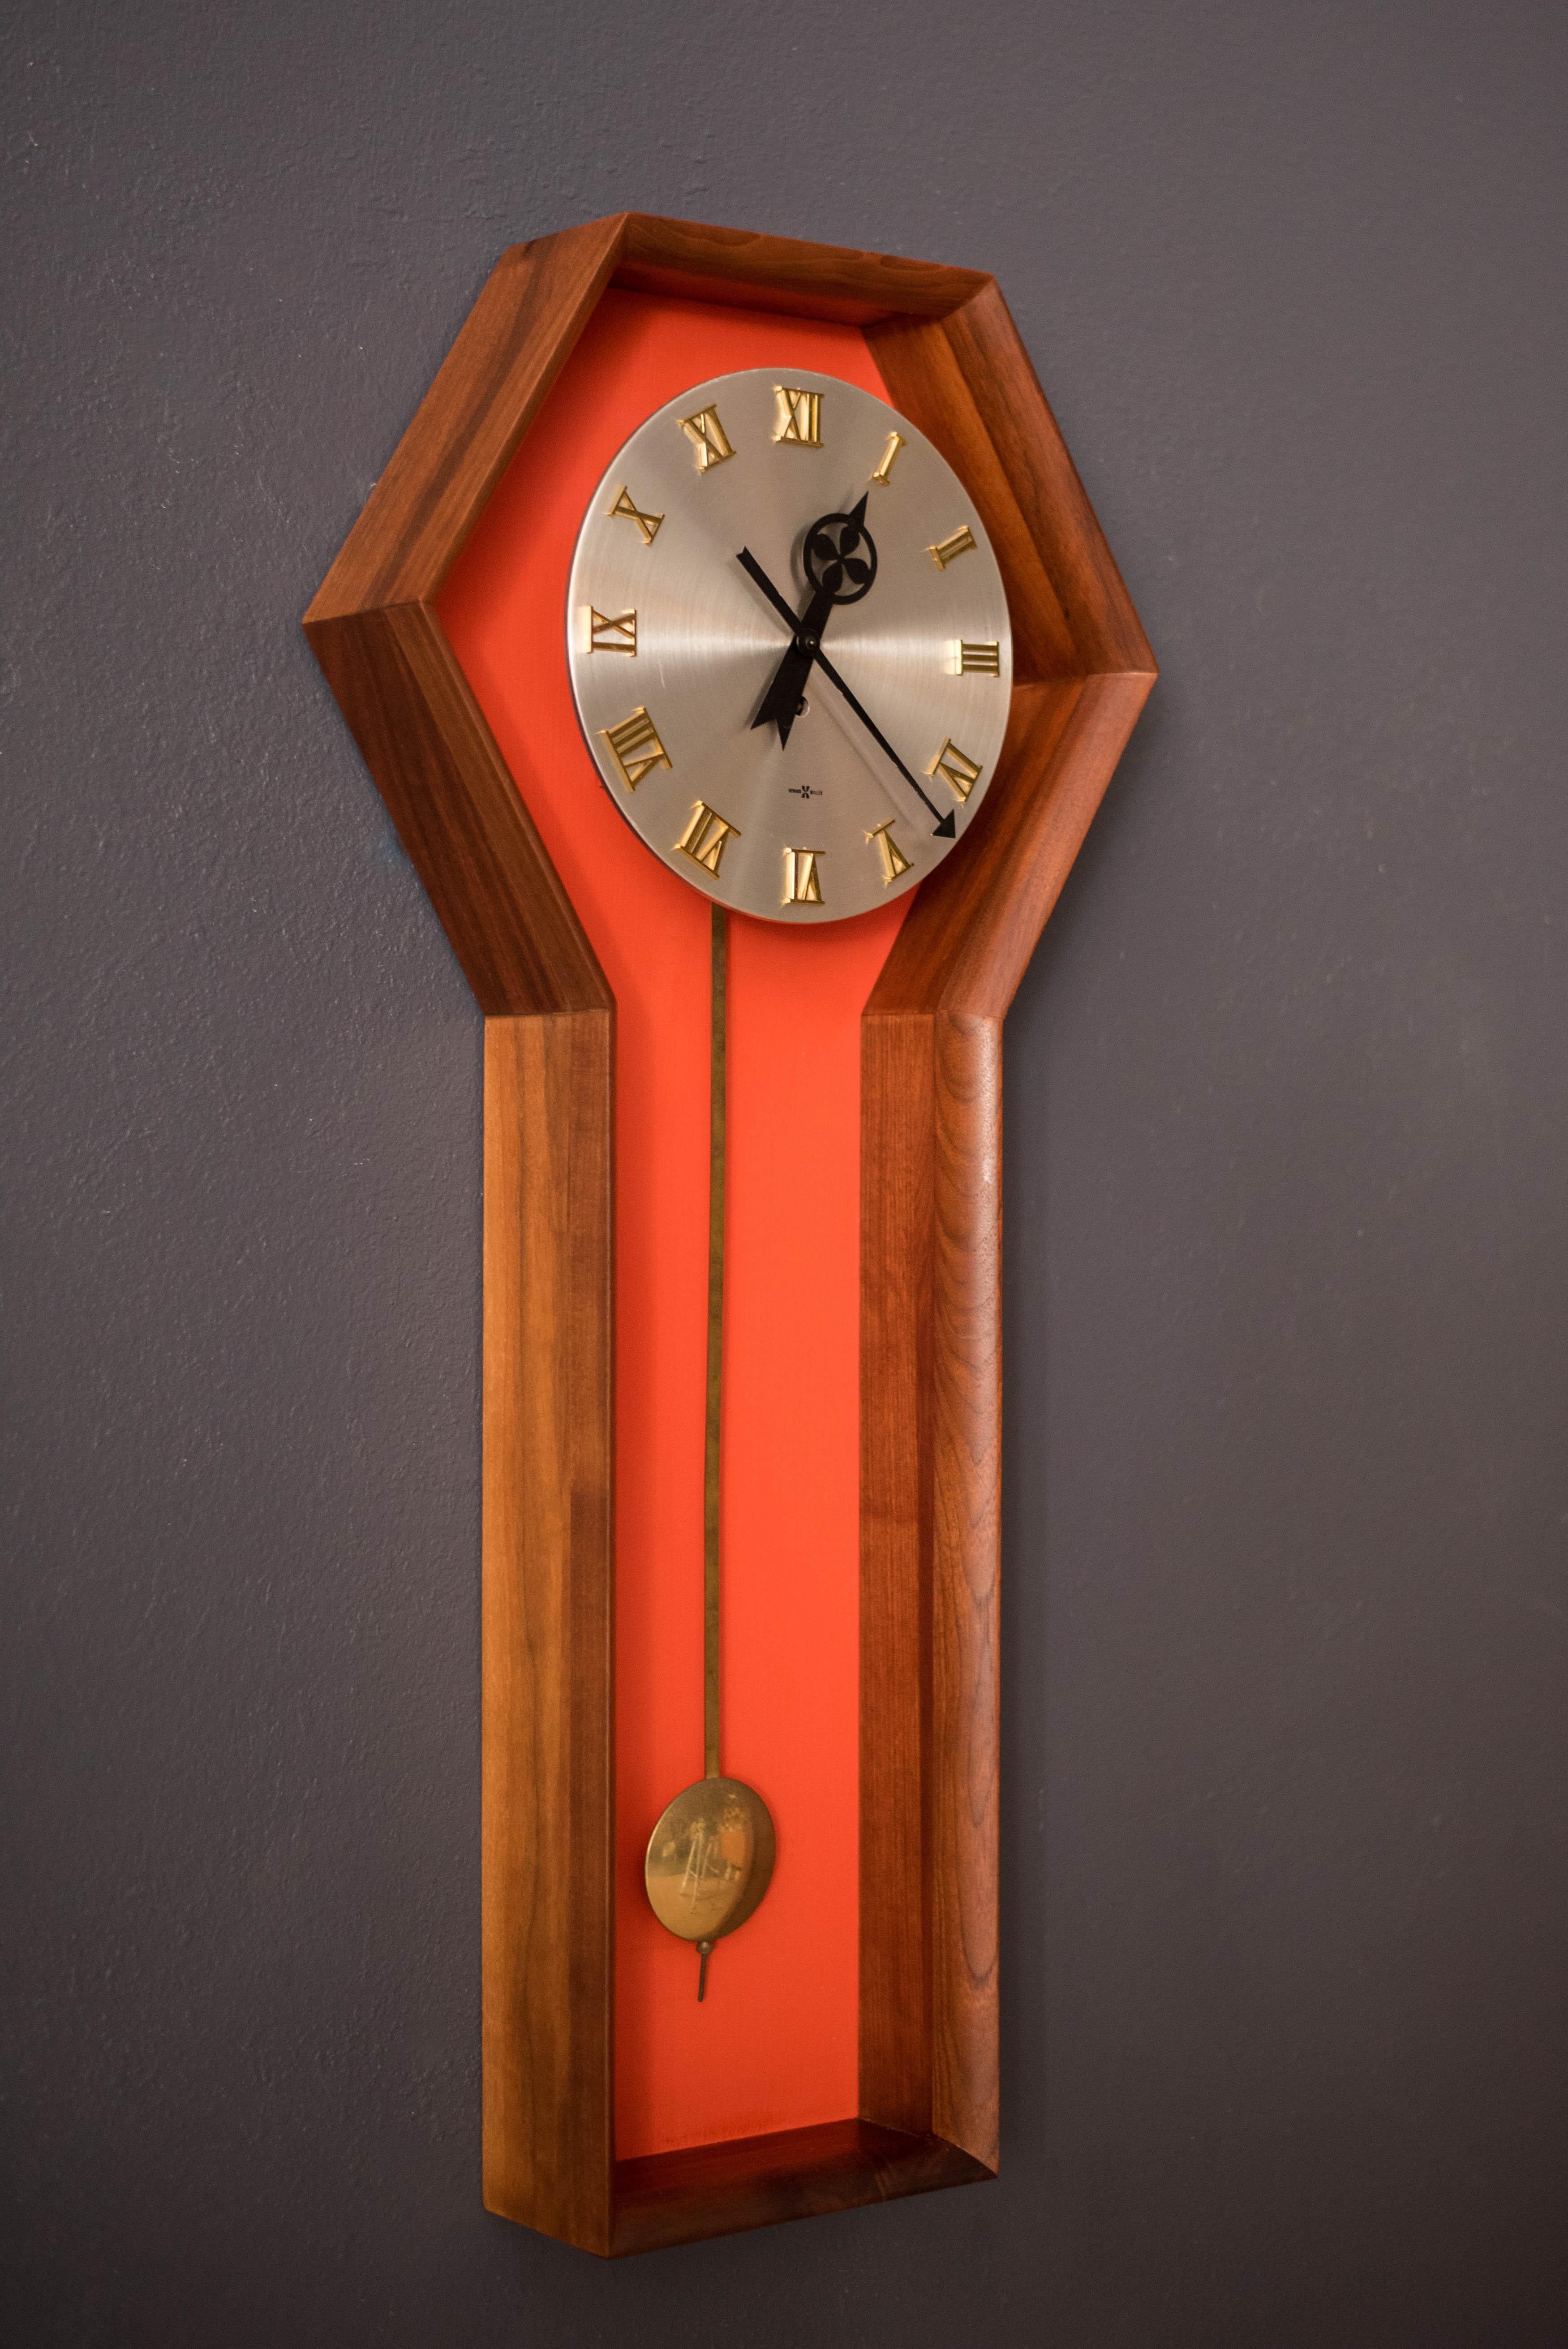 Vintage Meridian wall clock designed by Arthur Umanoff for Howard Miller in walnut, circa 1970s. This piece features a coffin shaped wood case and an inset orange backdrop accented with a brass pendulum. Includes the original clock hands and keeps